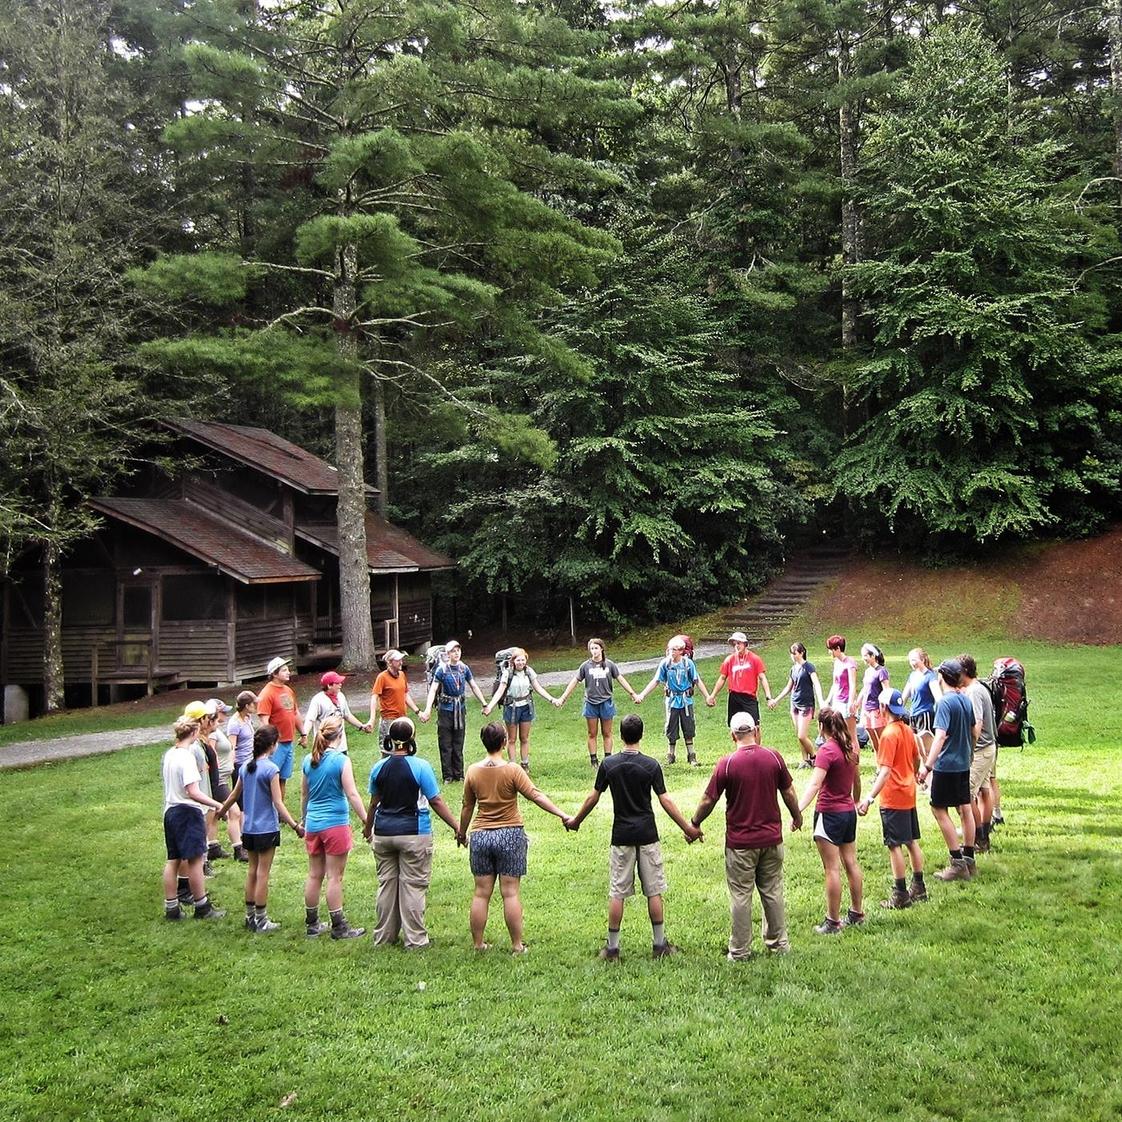 The Outdoor Academy Photo #1 - Community is one of our school's four cornerstones... Let's circle up!